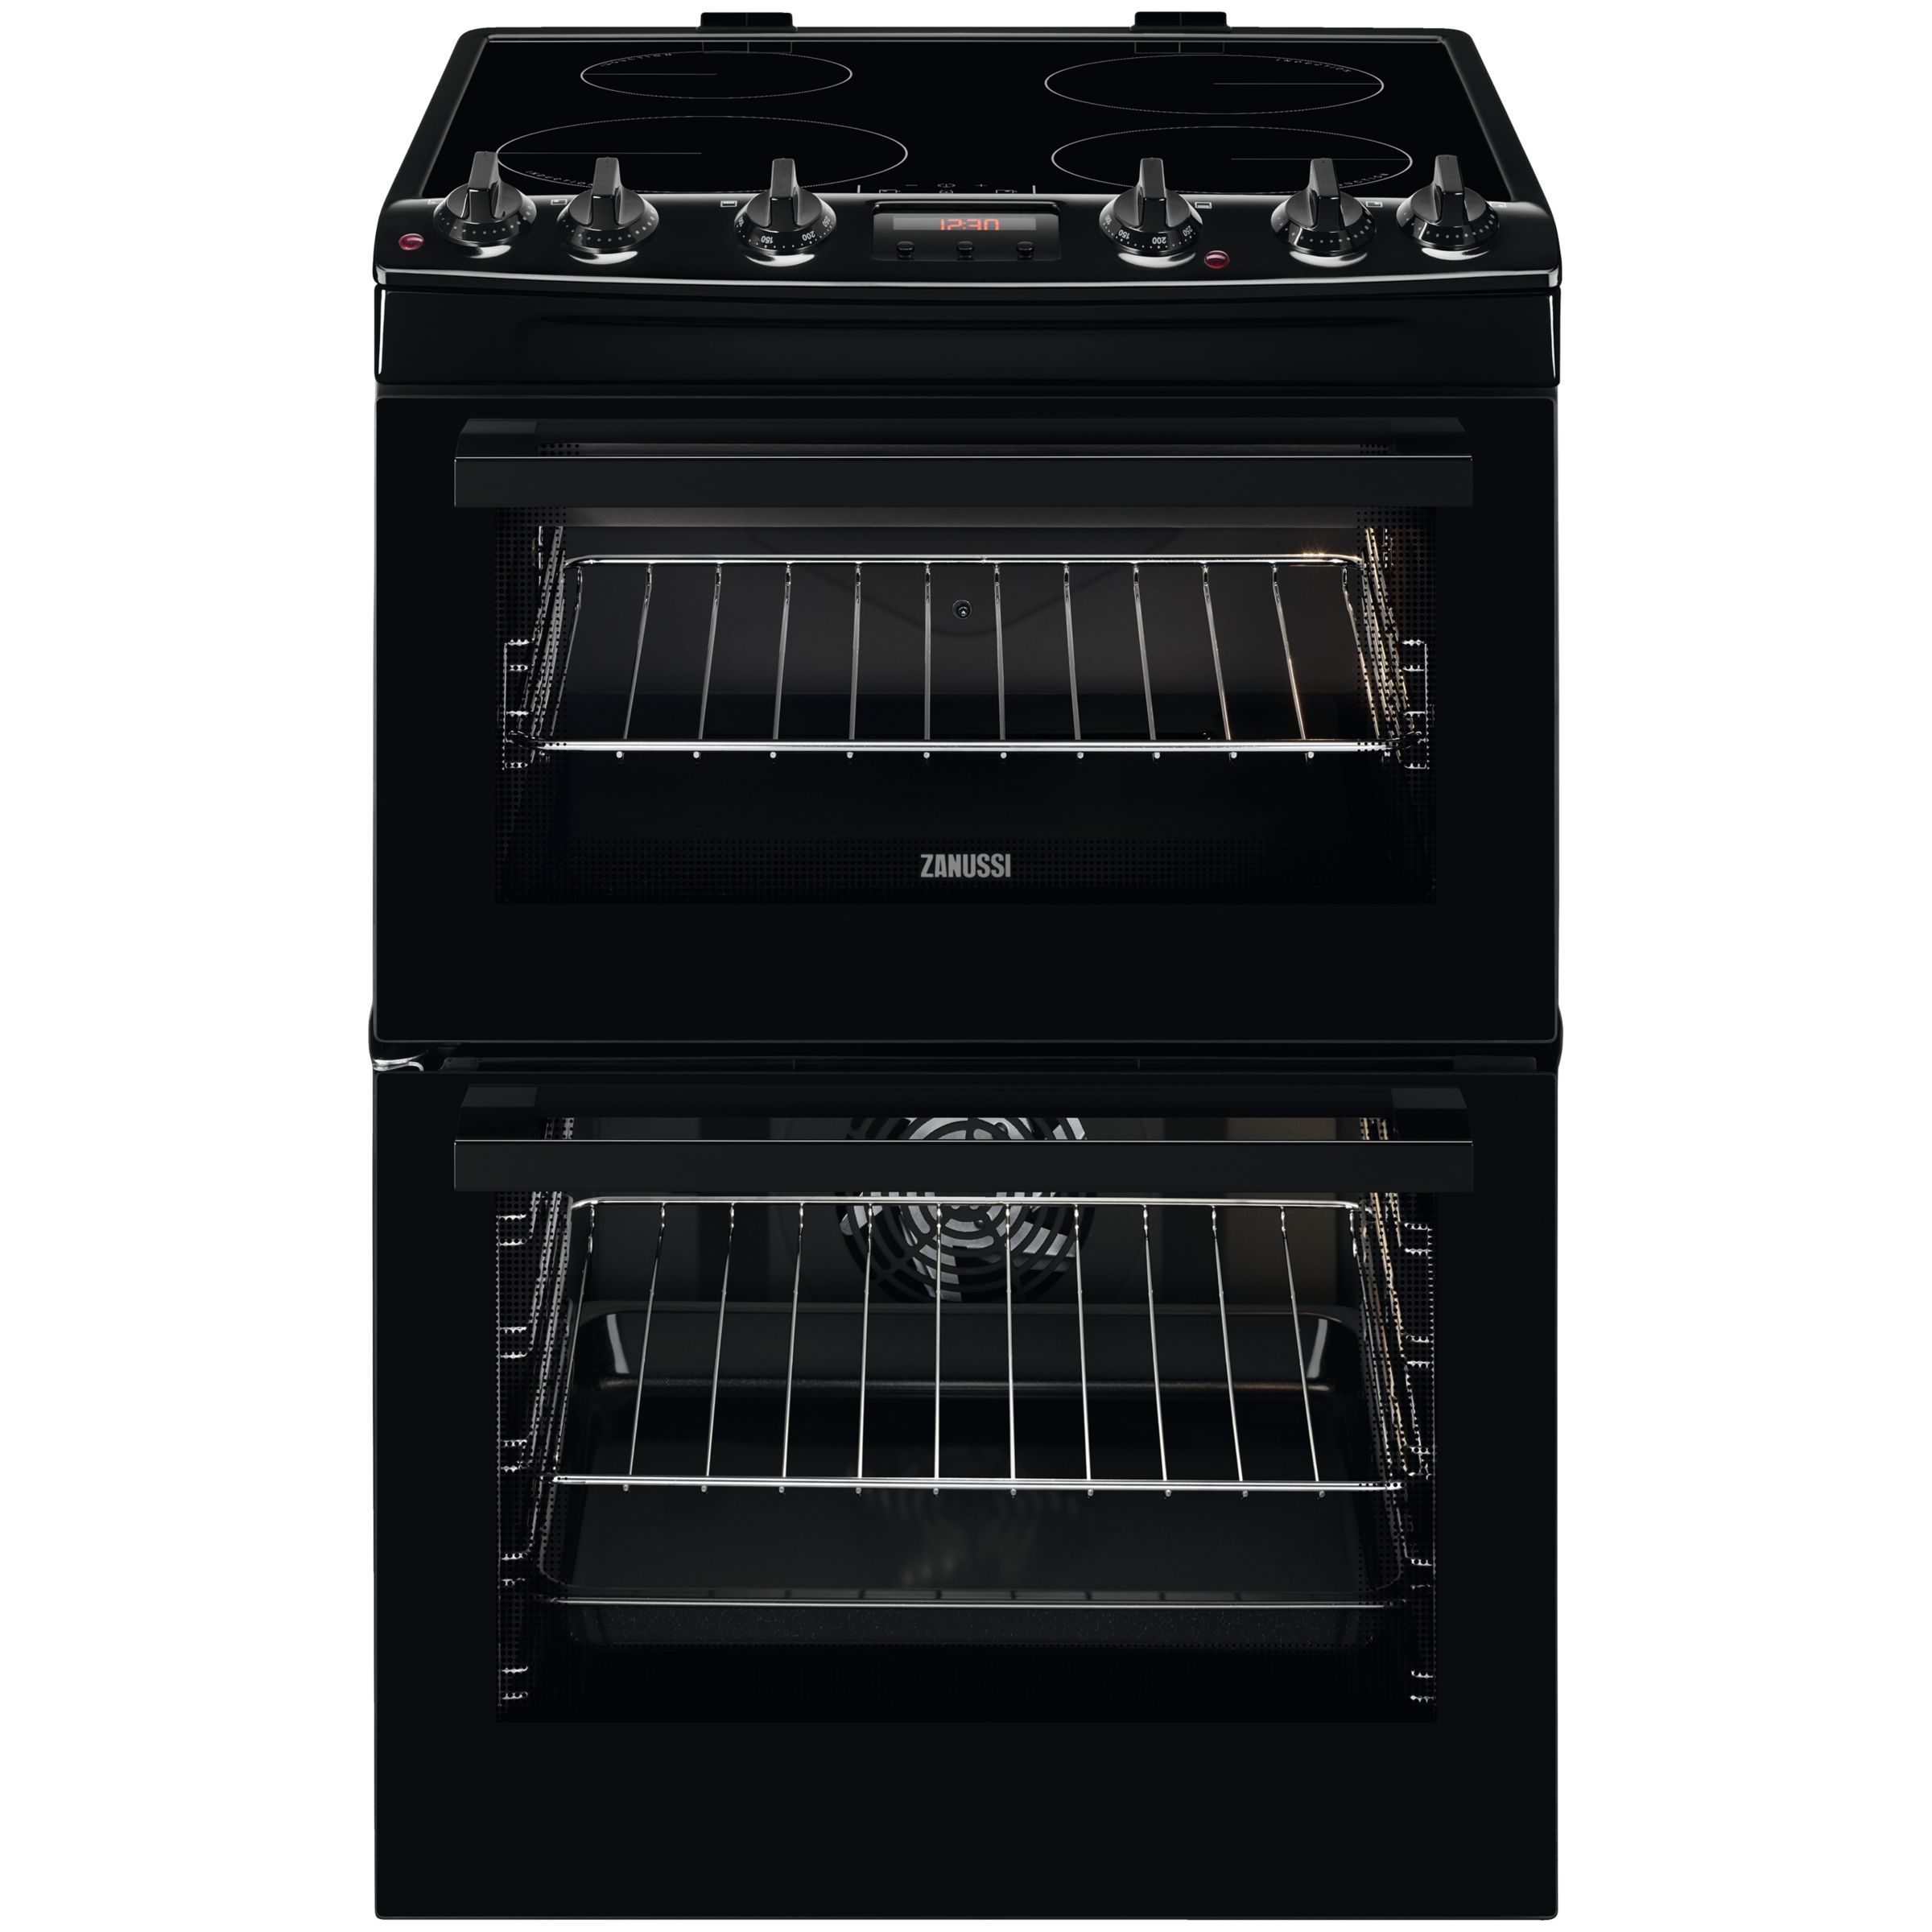 Zanussi ZCI66250 Freestanding Electric Cooker, A Energy Rating, 60cm Wide